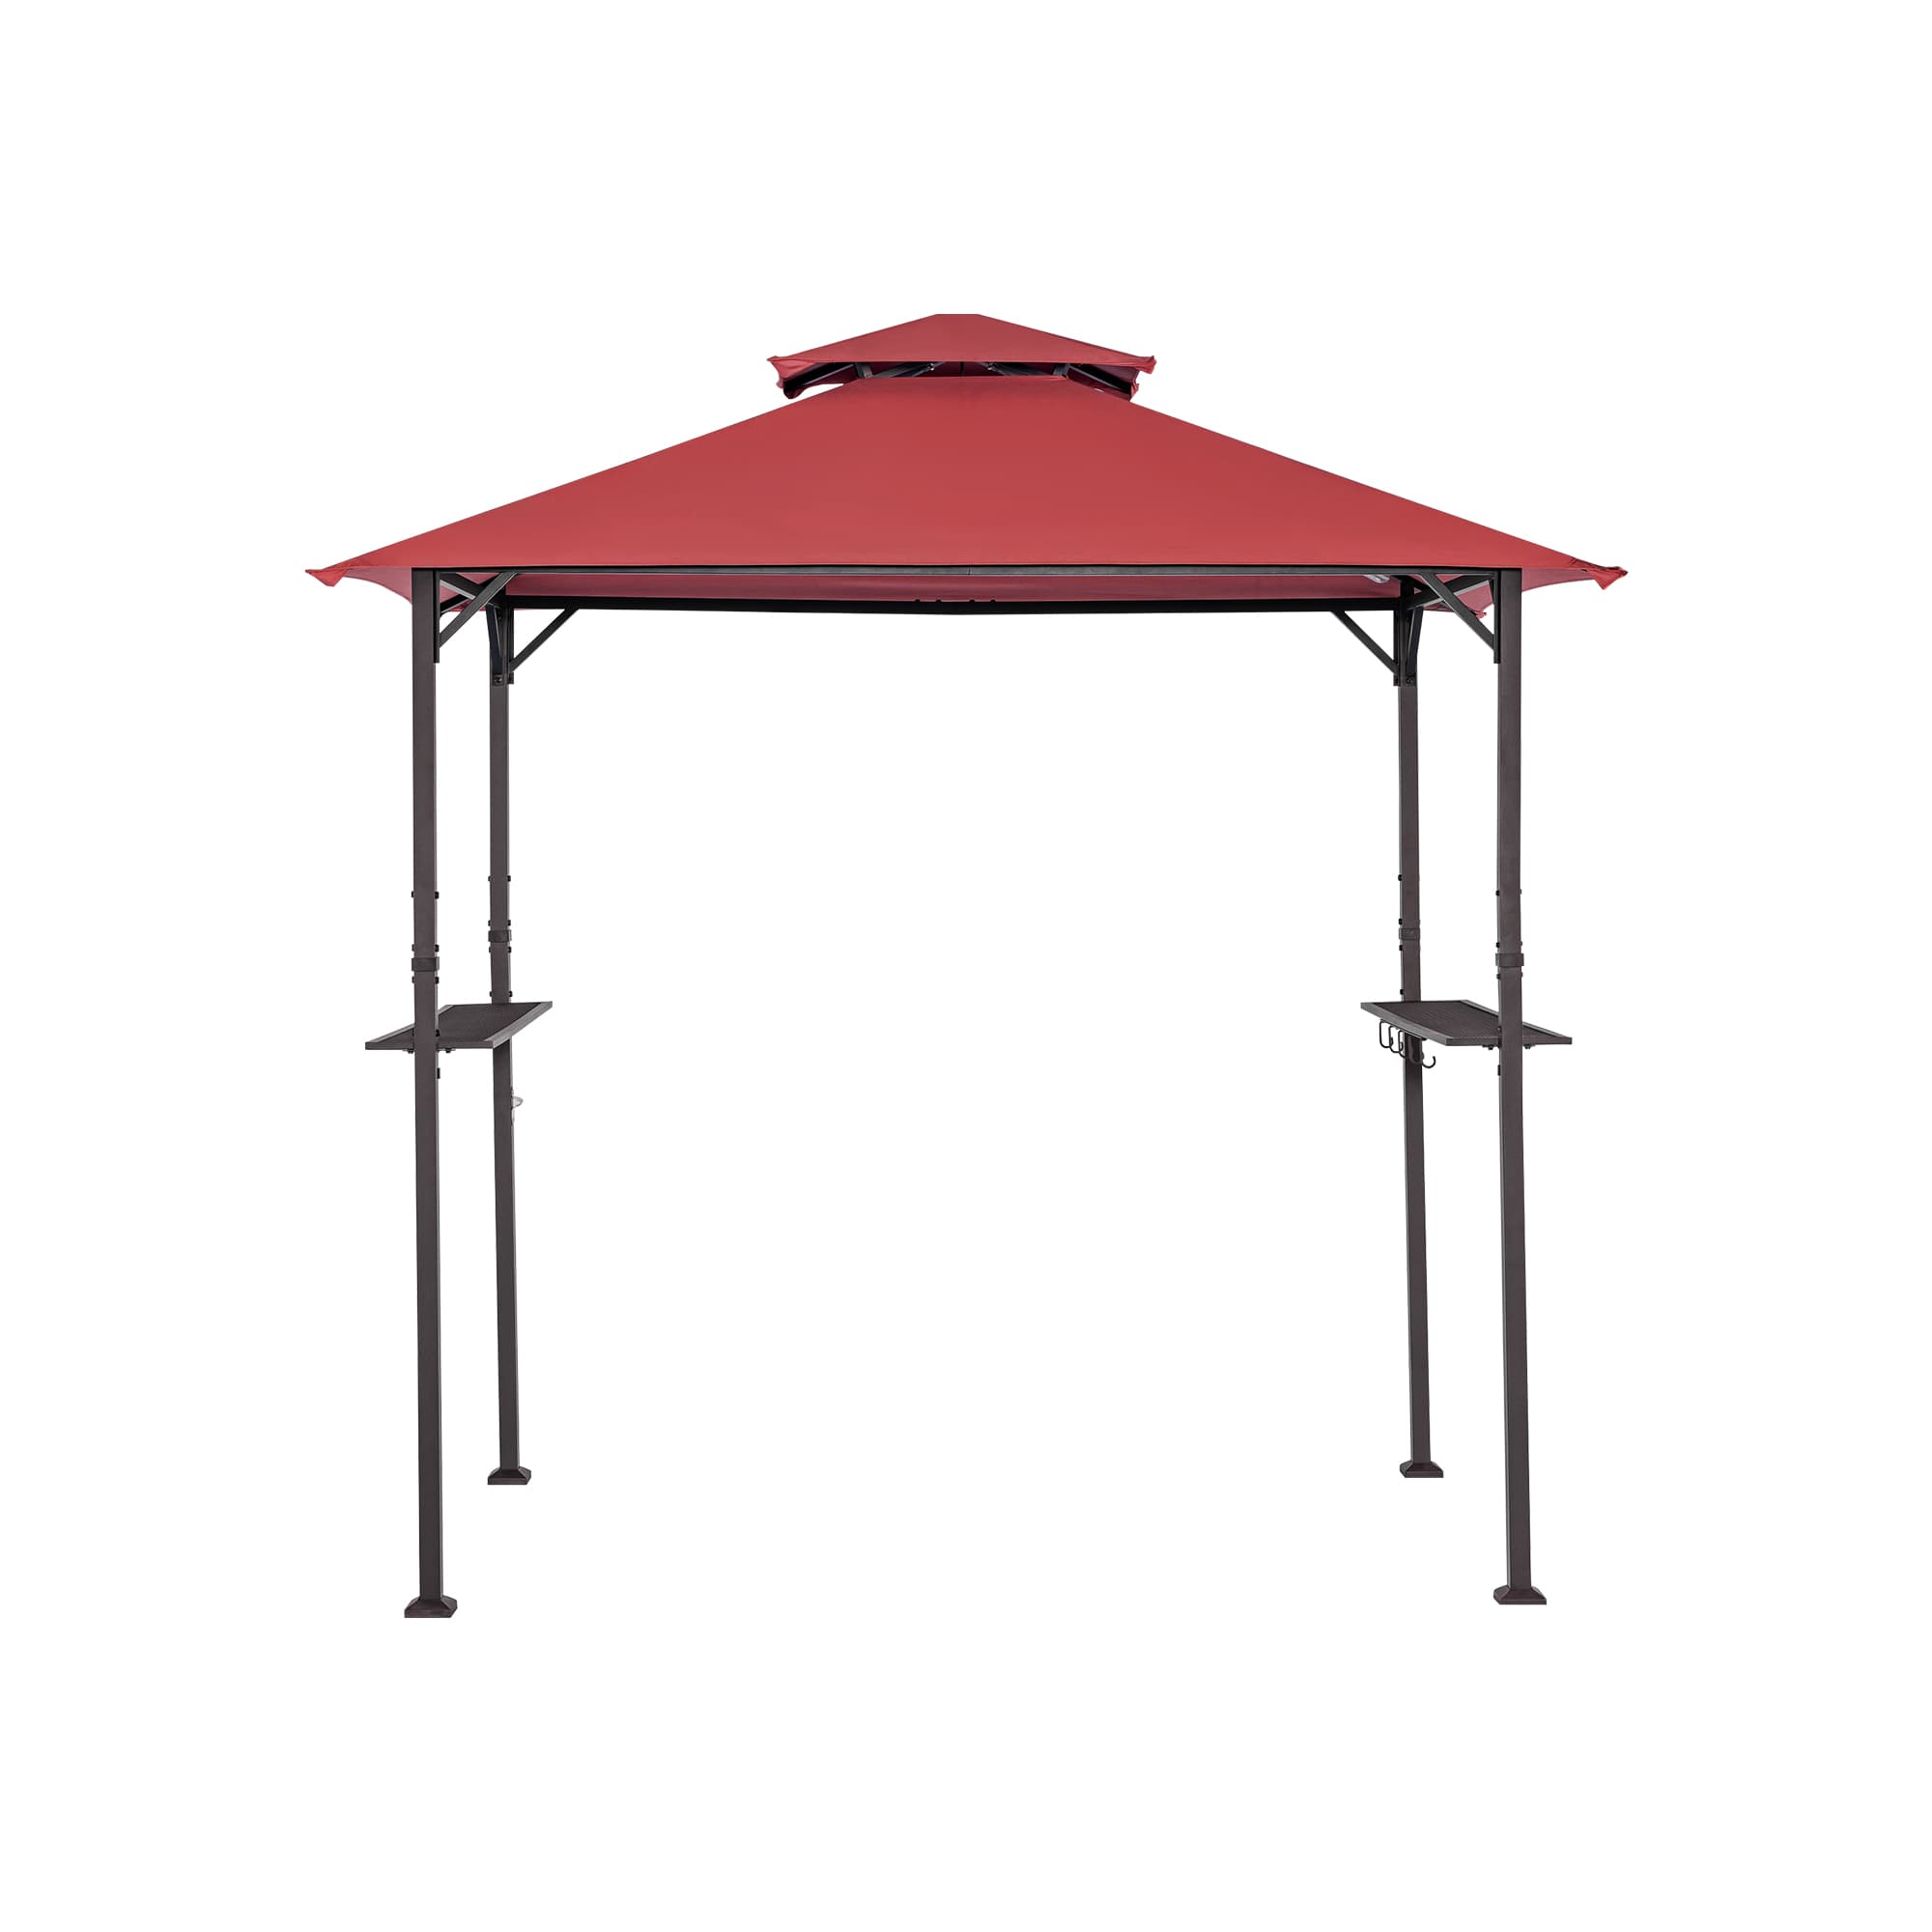 Olilawn 8' x 5' Volcano Grill Gazebo with Double Top